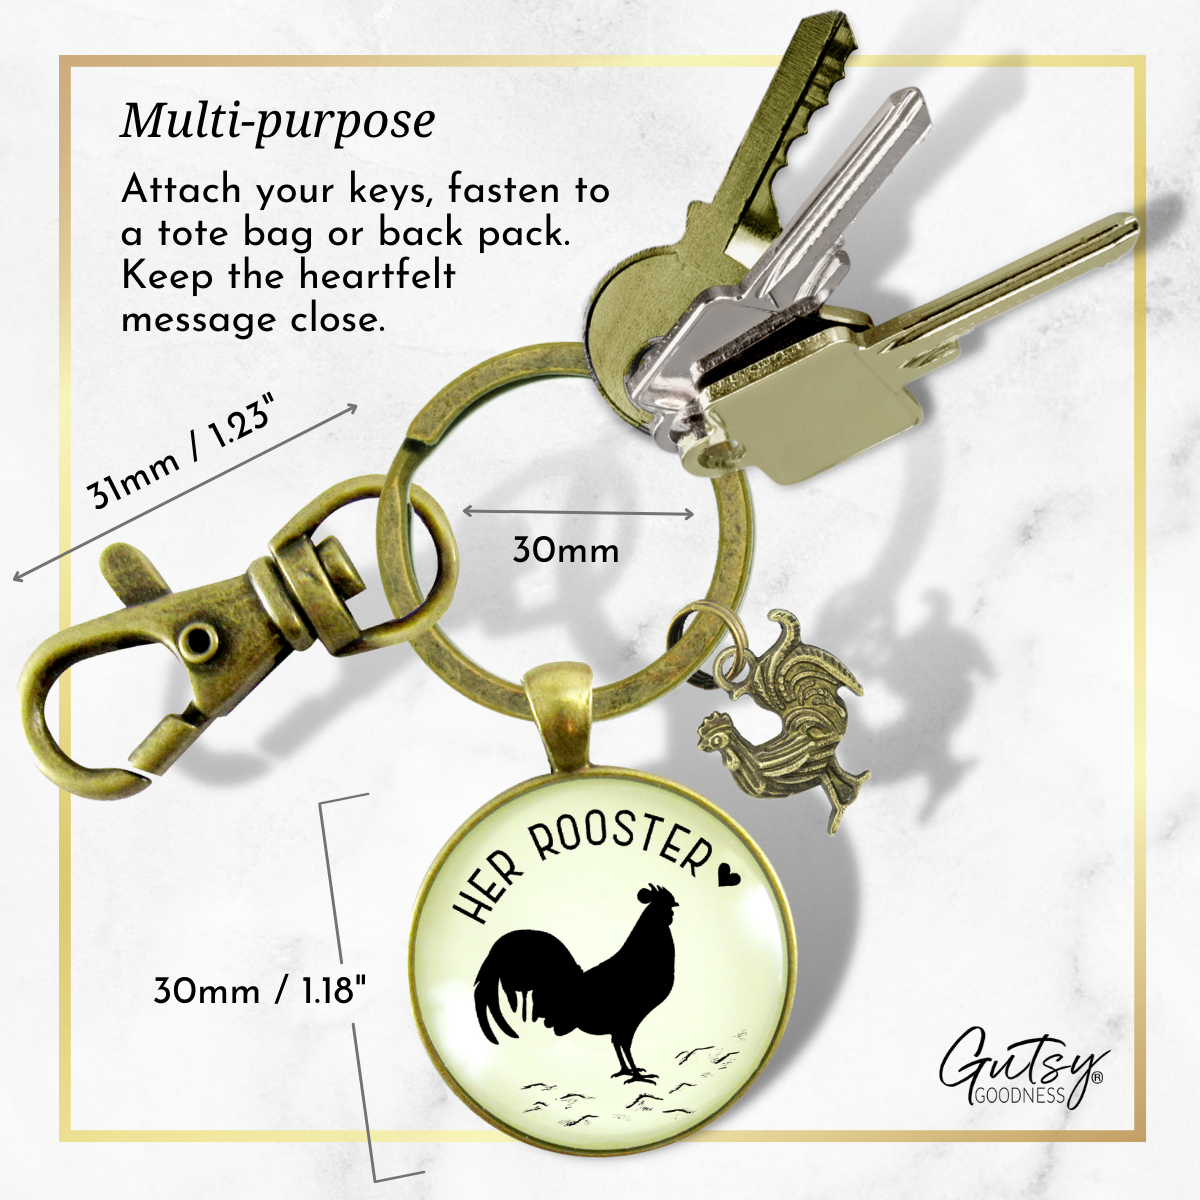 Her Rooster Mens Keychain For Chicken Family Vintage Inspired Jewlery - Gutsy Goodness Handmade Jewelry;Her Rooster Mens Keychain For Chicken Family Vintage Inspired Jewlery